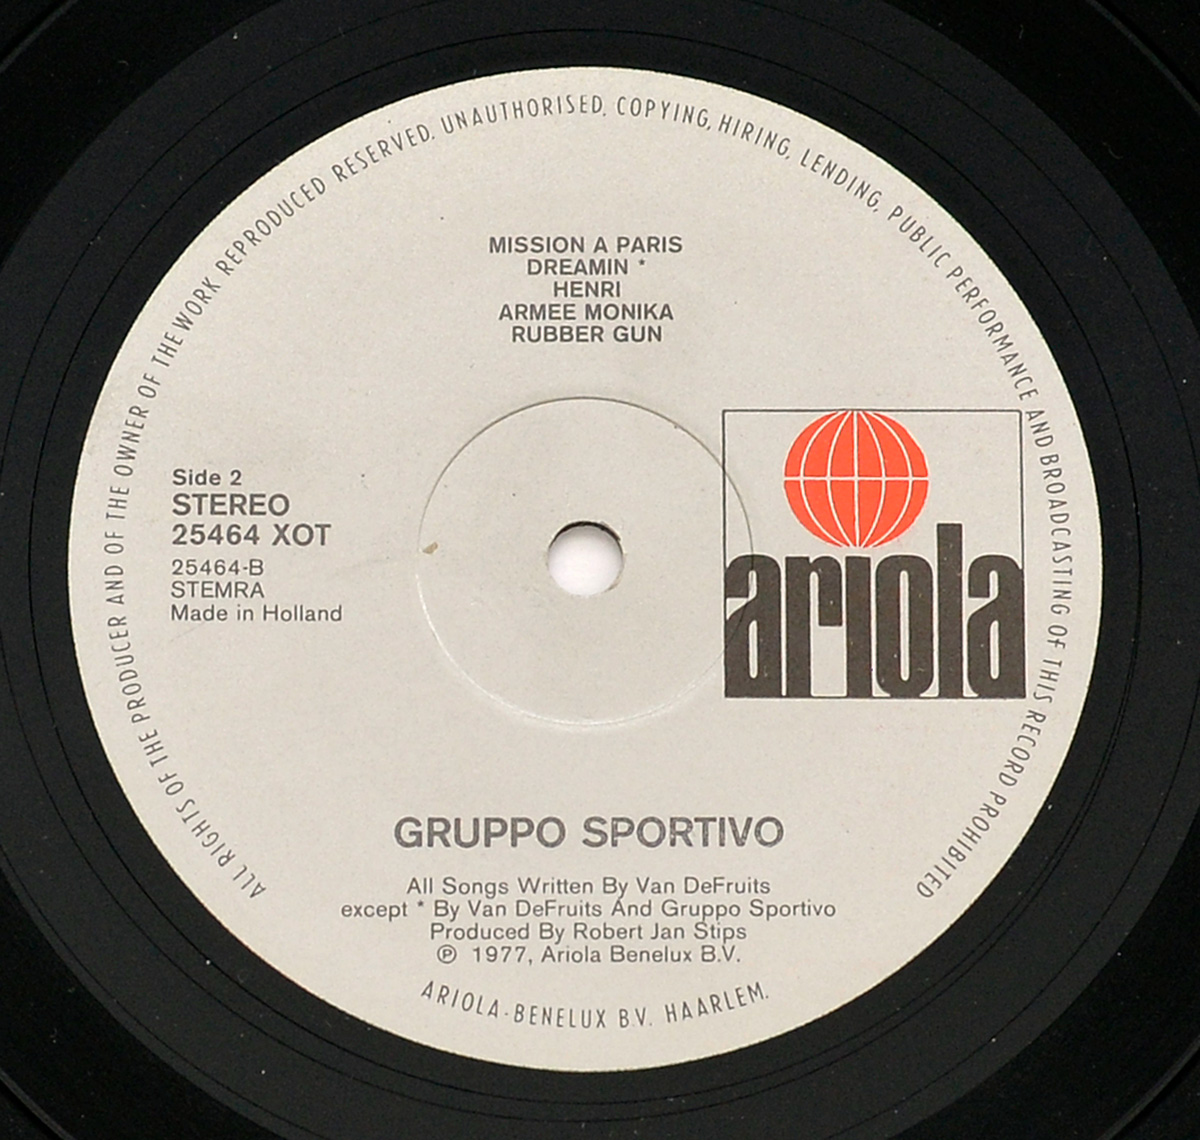 Photo of 12" LP Record Side Two GRUPPO SPORTIVO 10 Mistakes  Vinyl Record Gallery https://vinyl-records.nl//